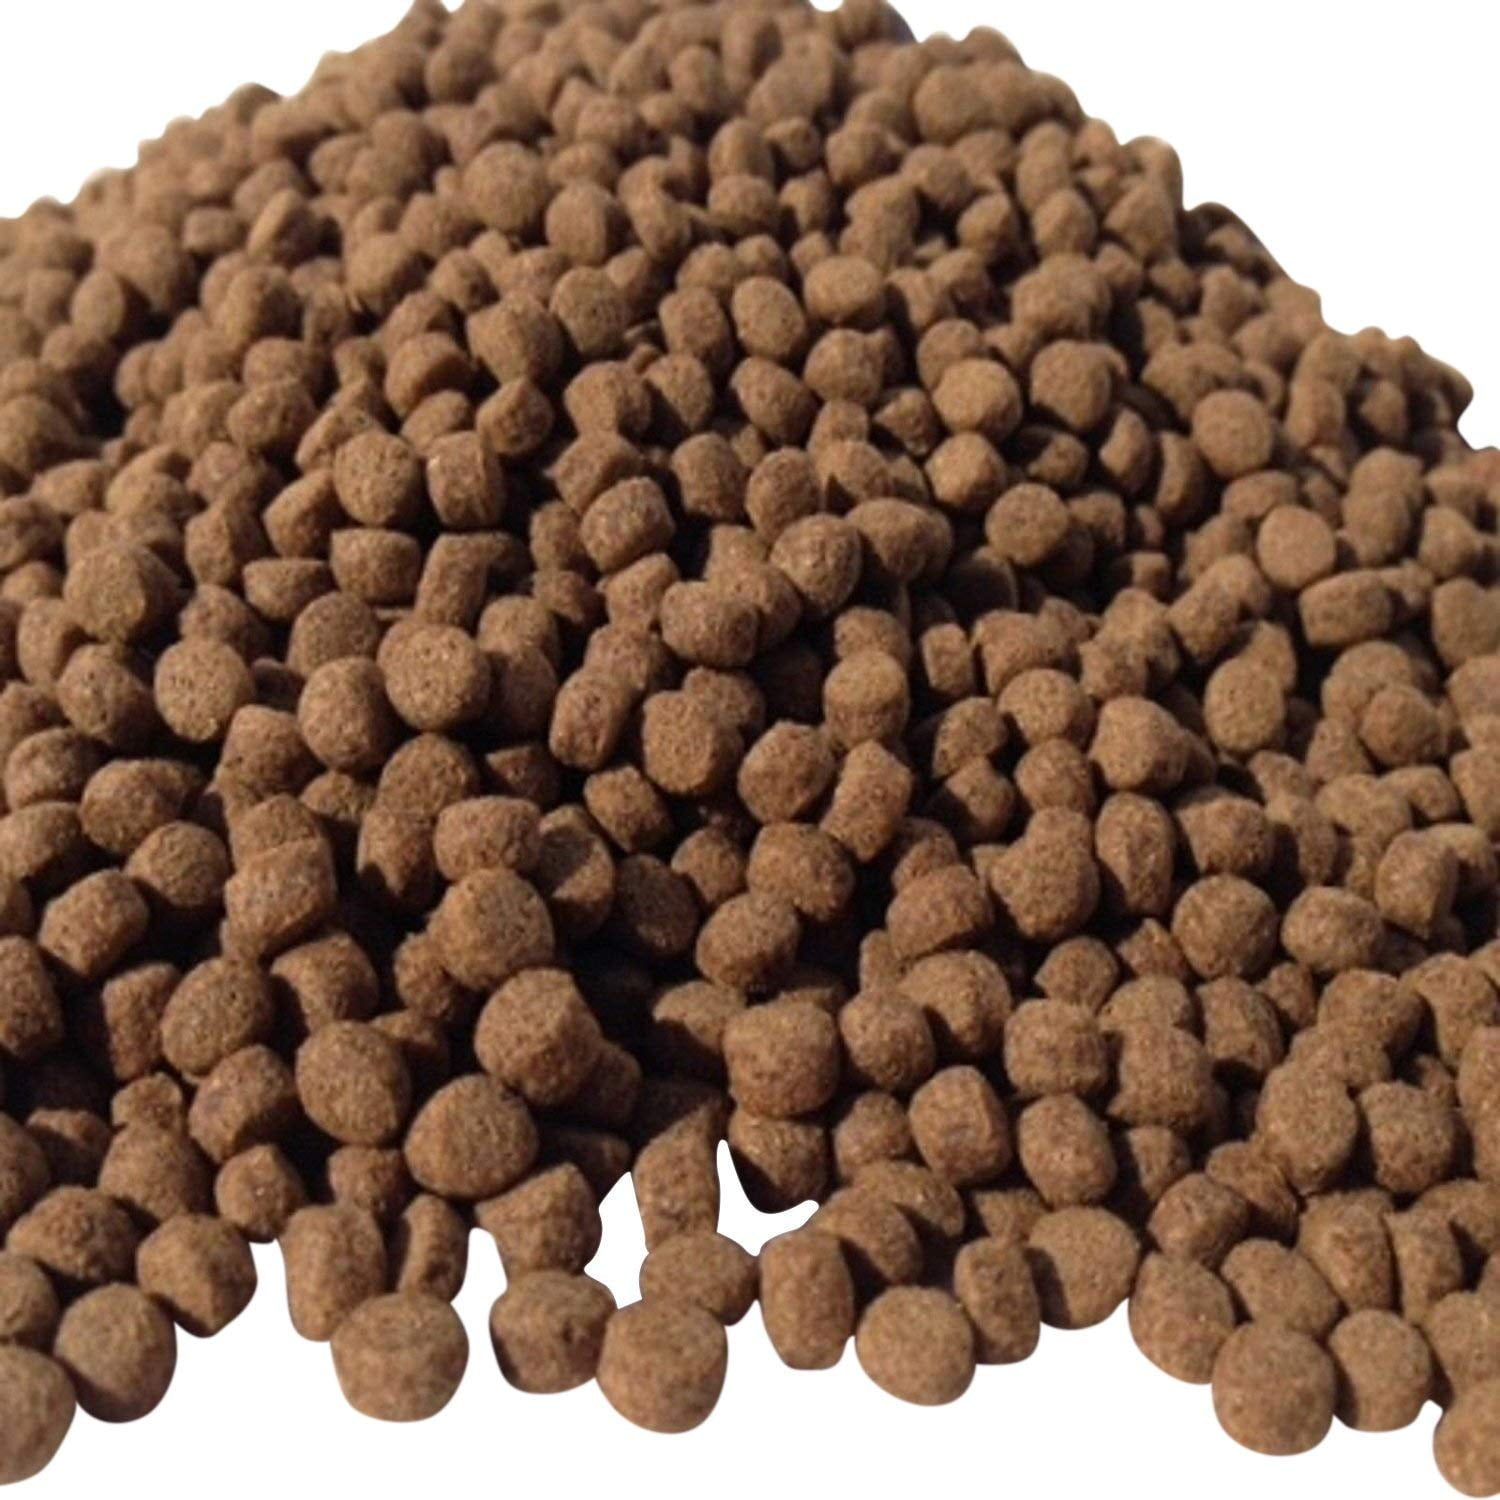 Aquatic Foods 25% Silkworm Koi & Pond Fish 1/4" Floating Pellets for Glossing your Koi's Colors...5-lbs